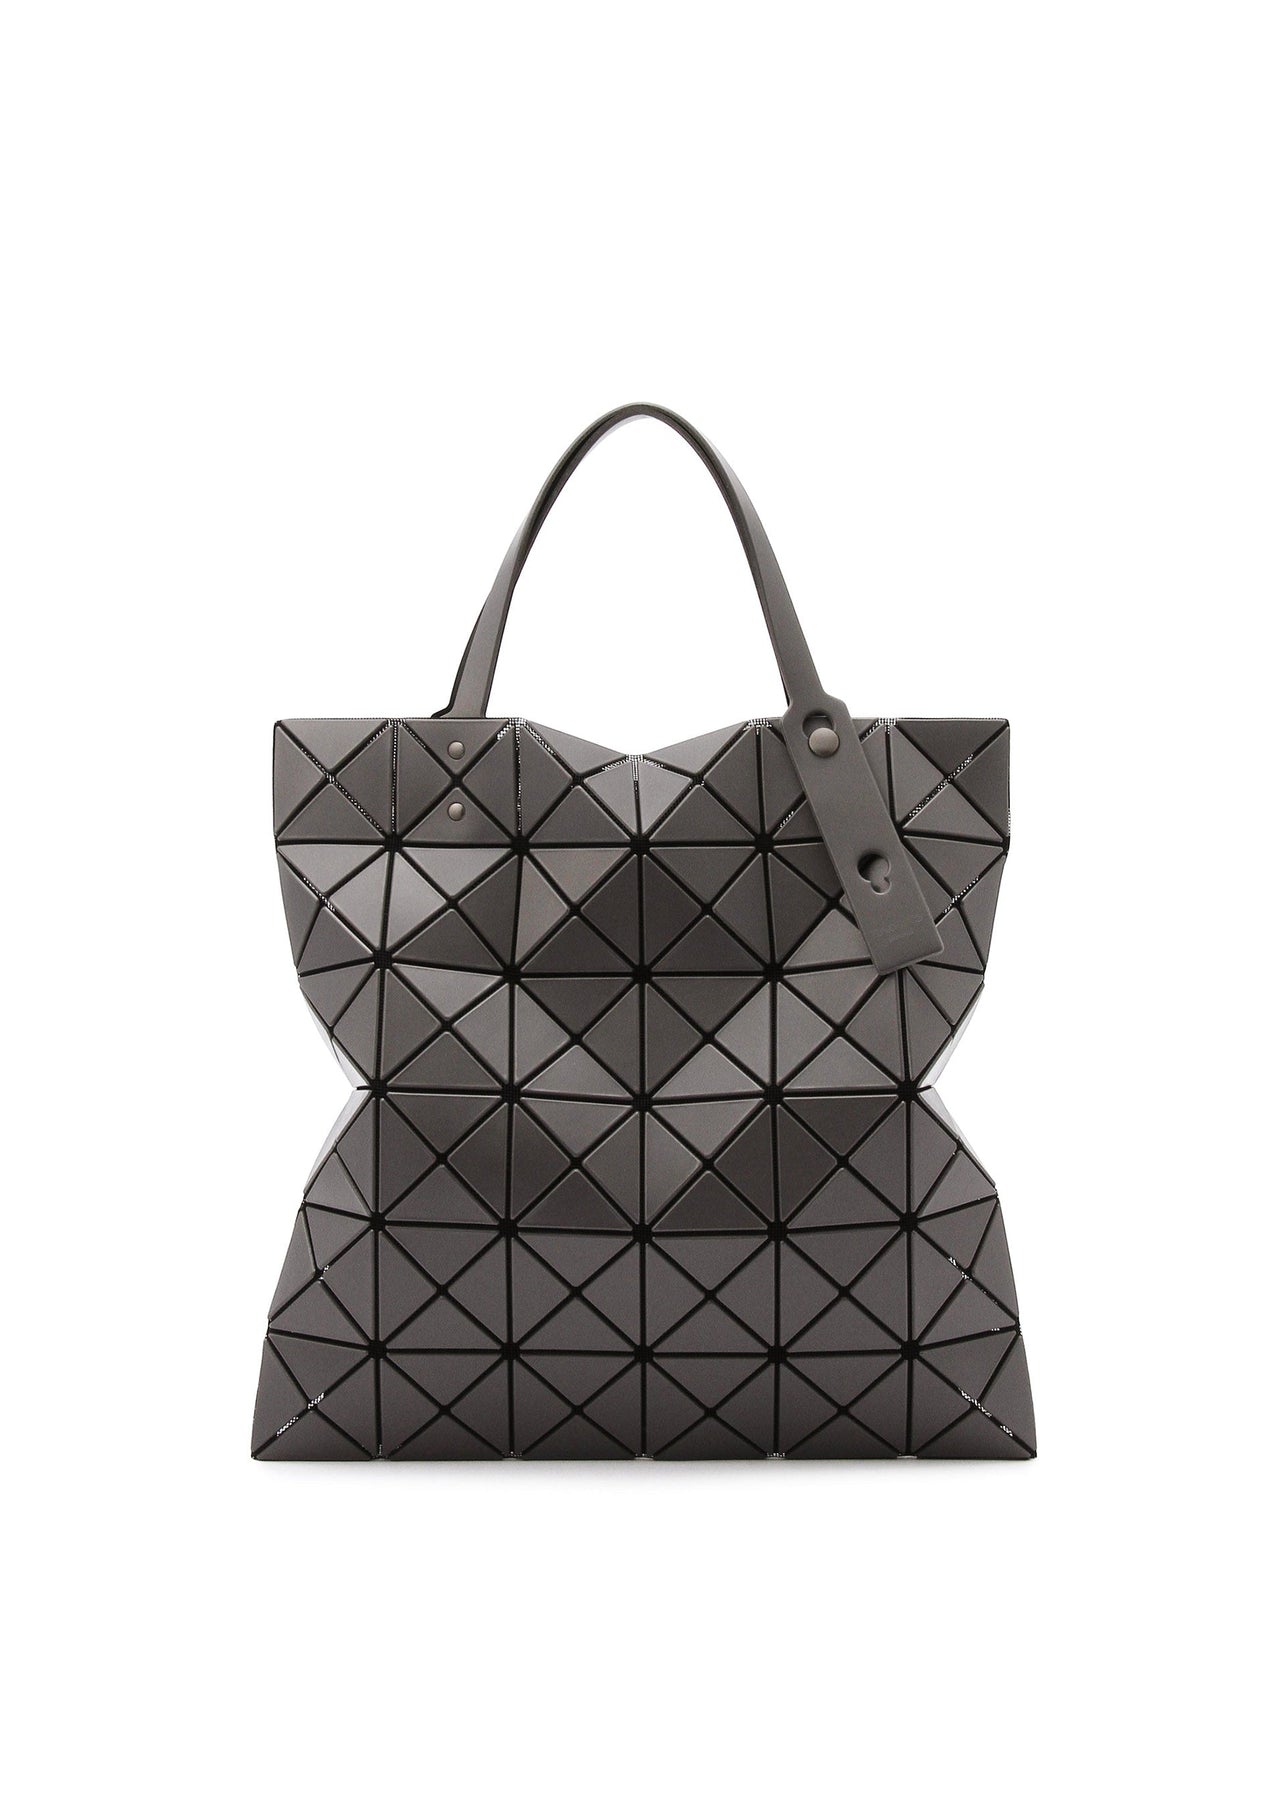 LUCENT MATTE TOTE BAG | The official ISSEY MIYAKE ONLINE STORE